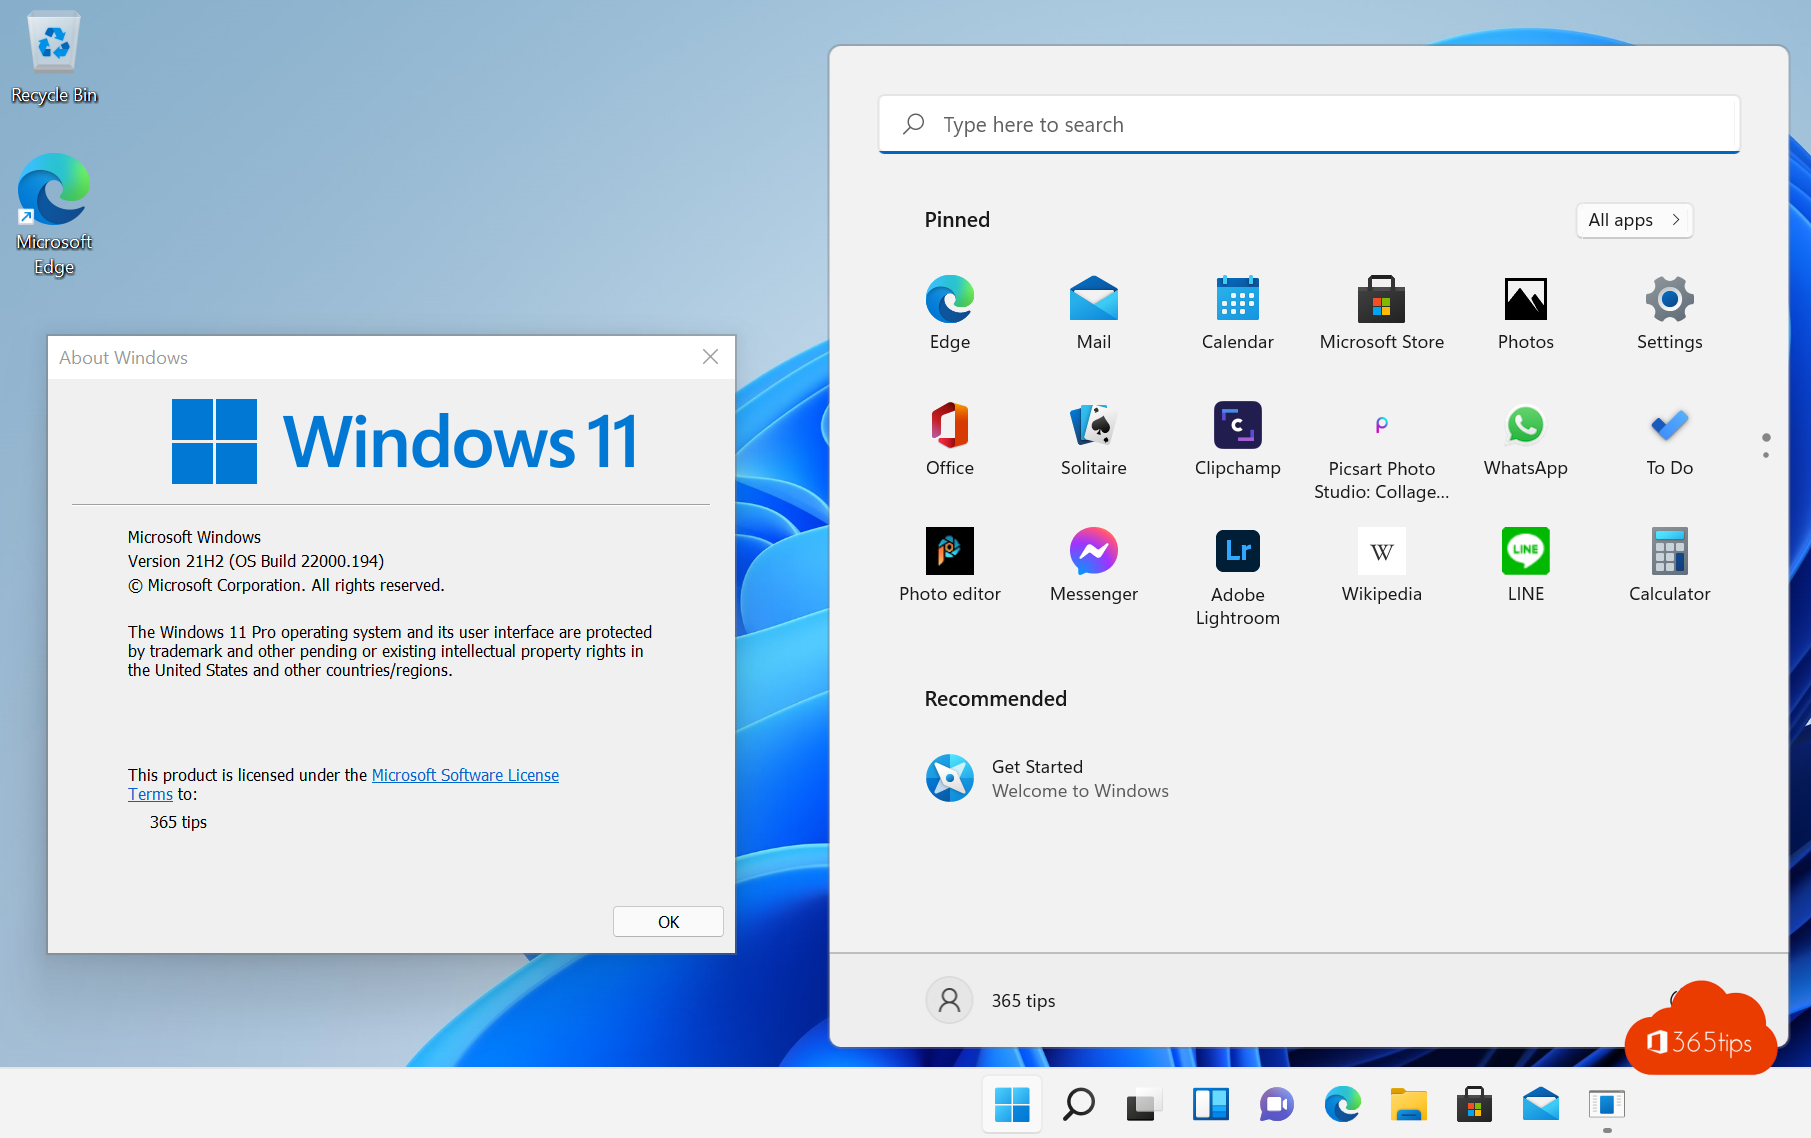 Installing Windows 11 with Microsoft's installation assistant - tutorial